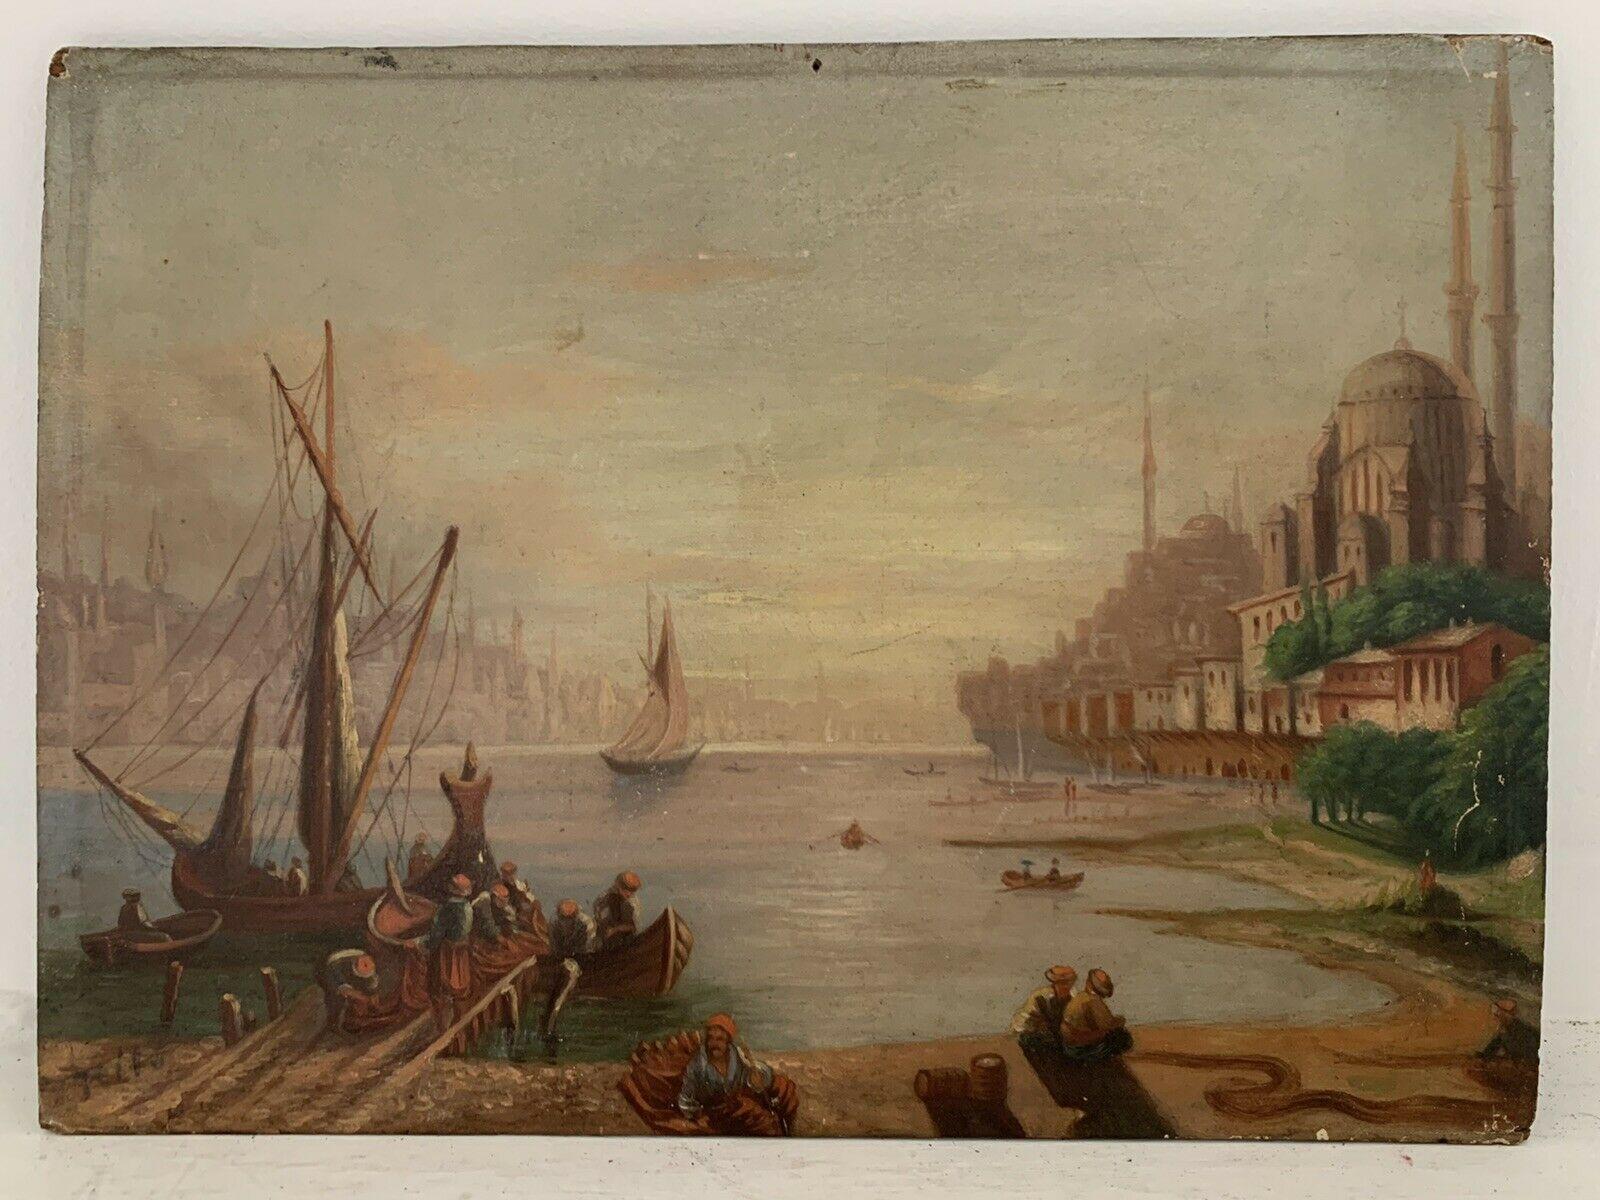 19th CENTURY EUROPEAN OIL ON WOOD PANEL - BUSY MERCHANT SHIPPING SUNSET SCENE - Painting by Unknown